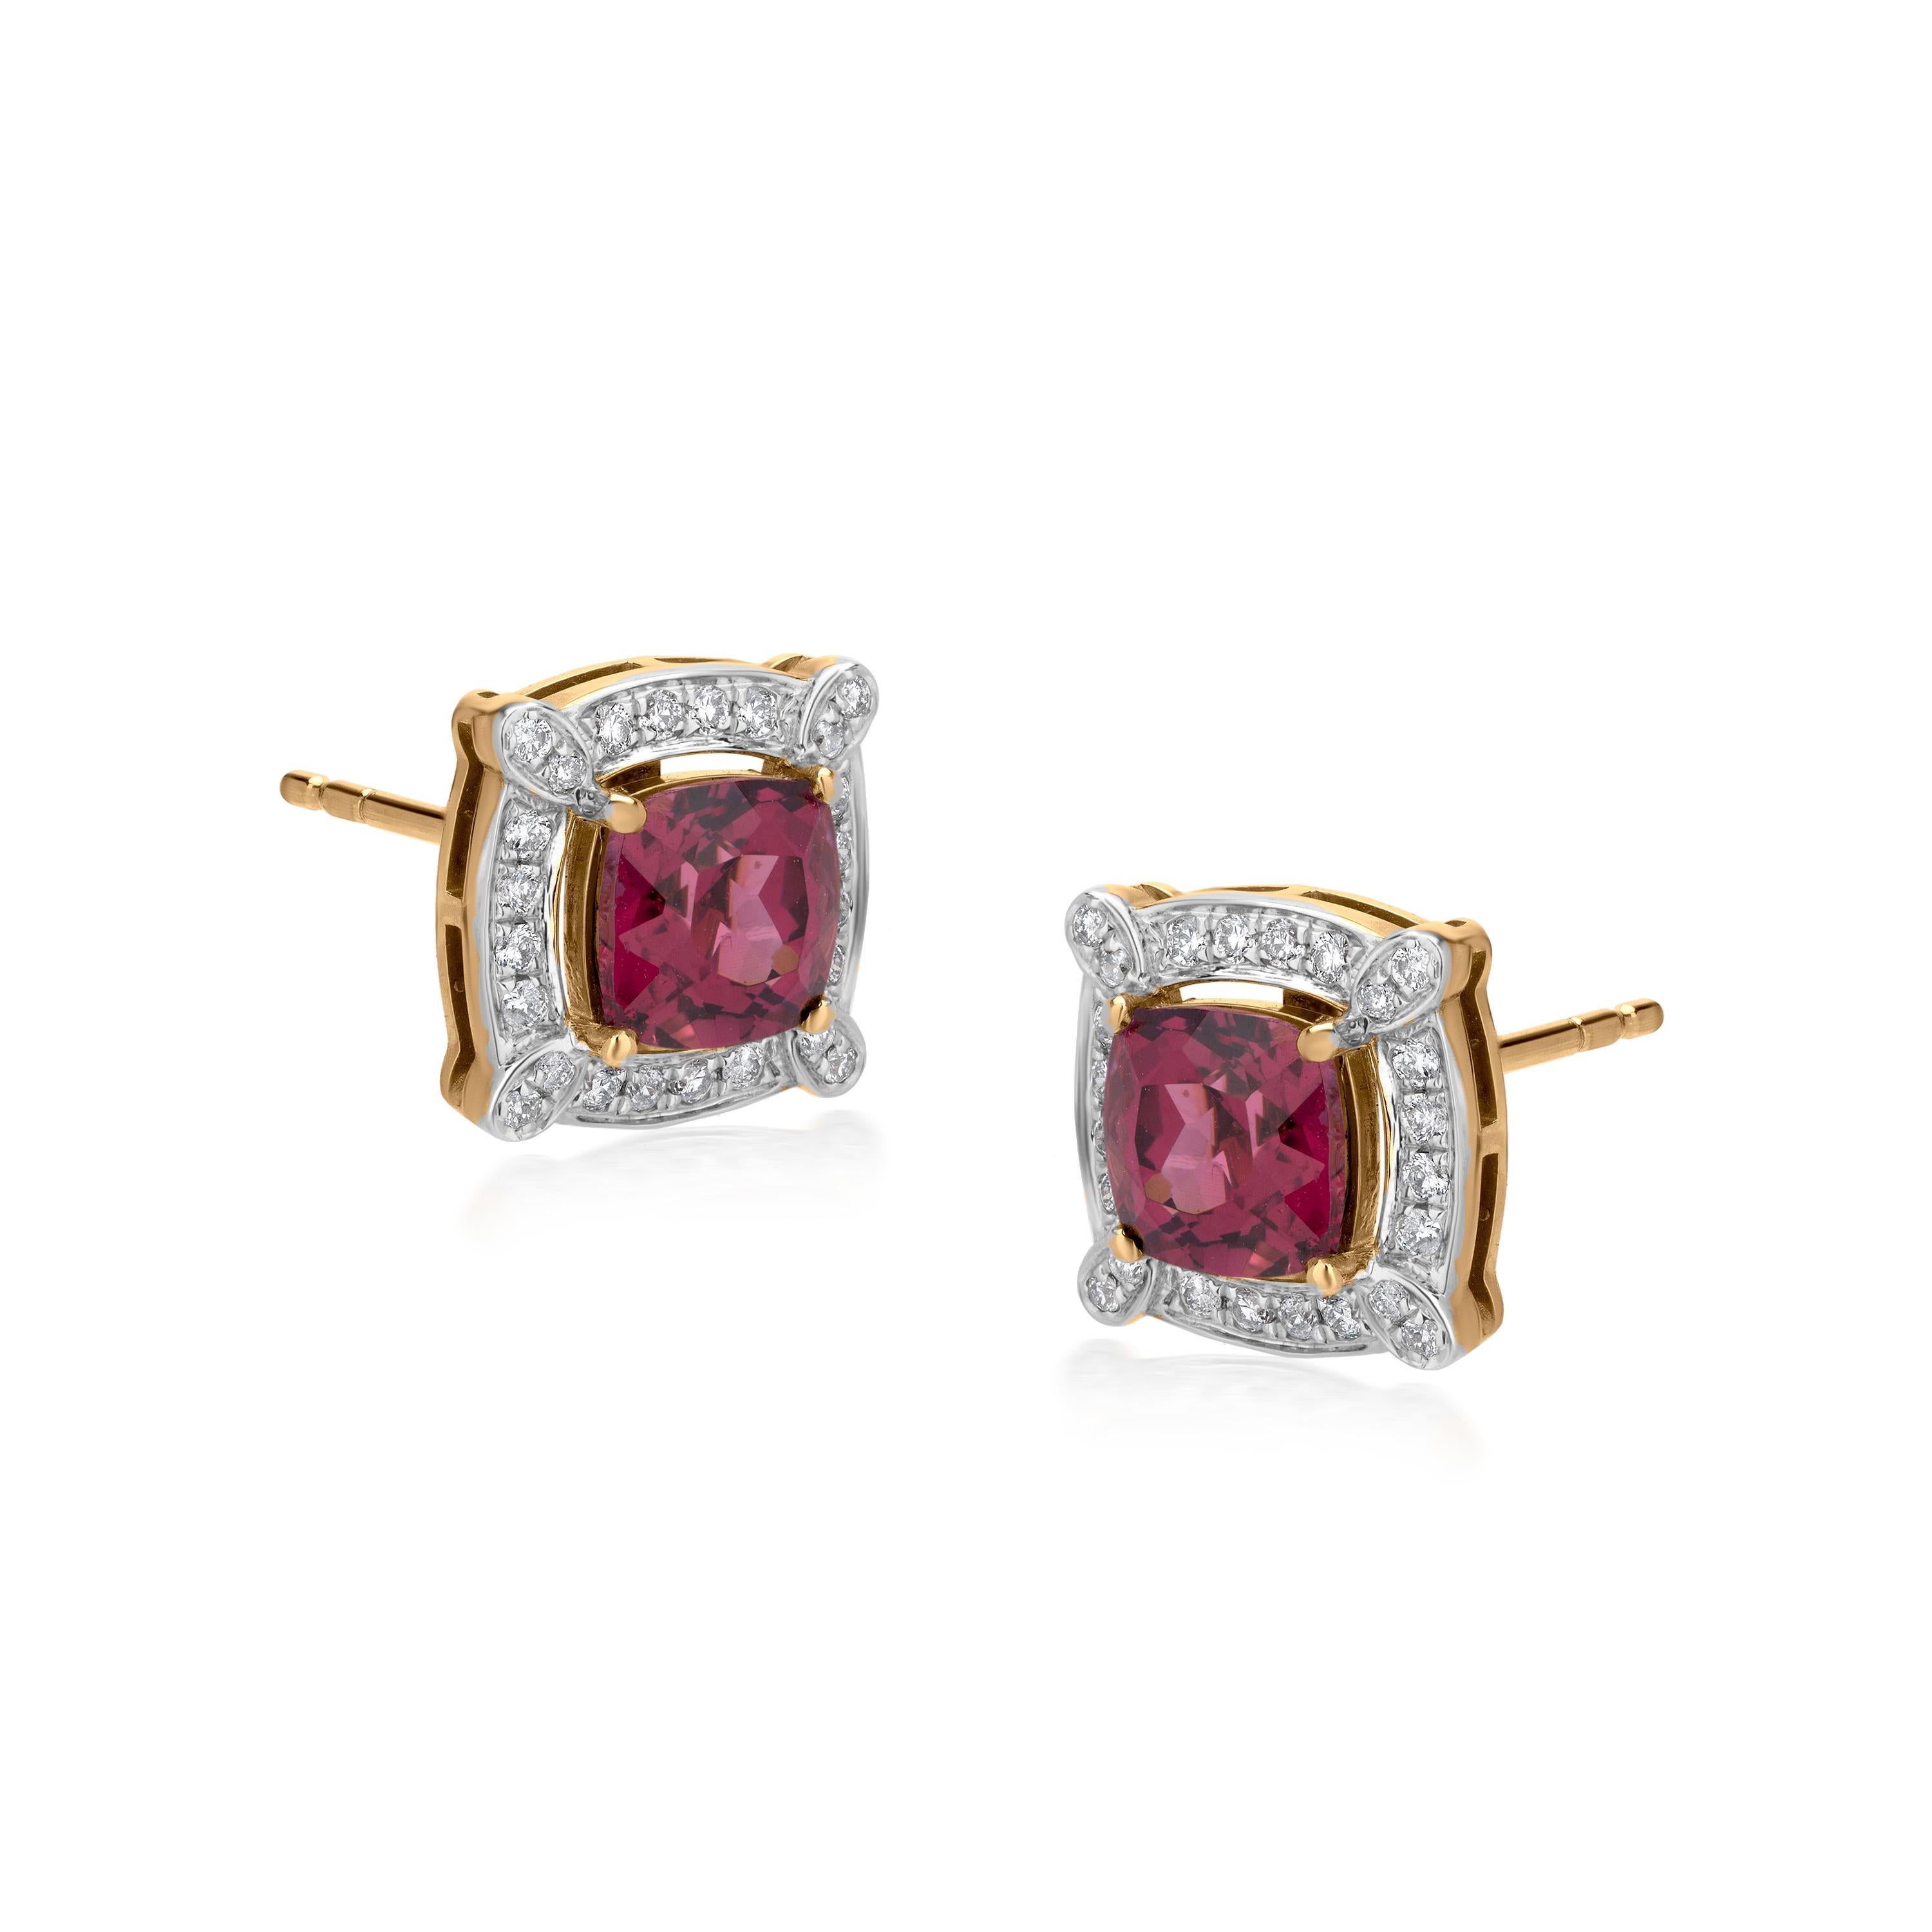 Contemporary Gemistry 2.94cttw Diamond Pave and Pink Garnet Prong Halo Stud Earrings For Sale